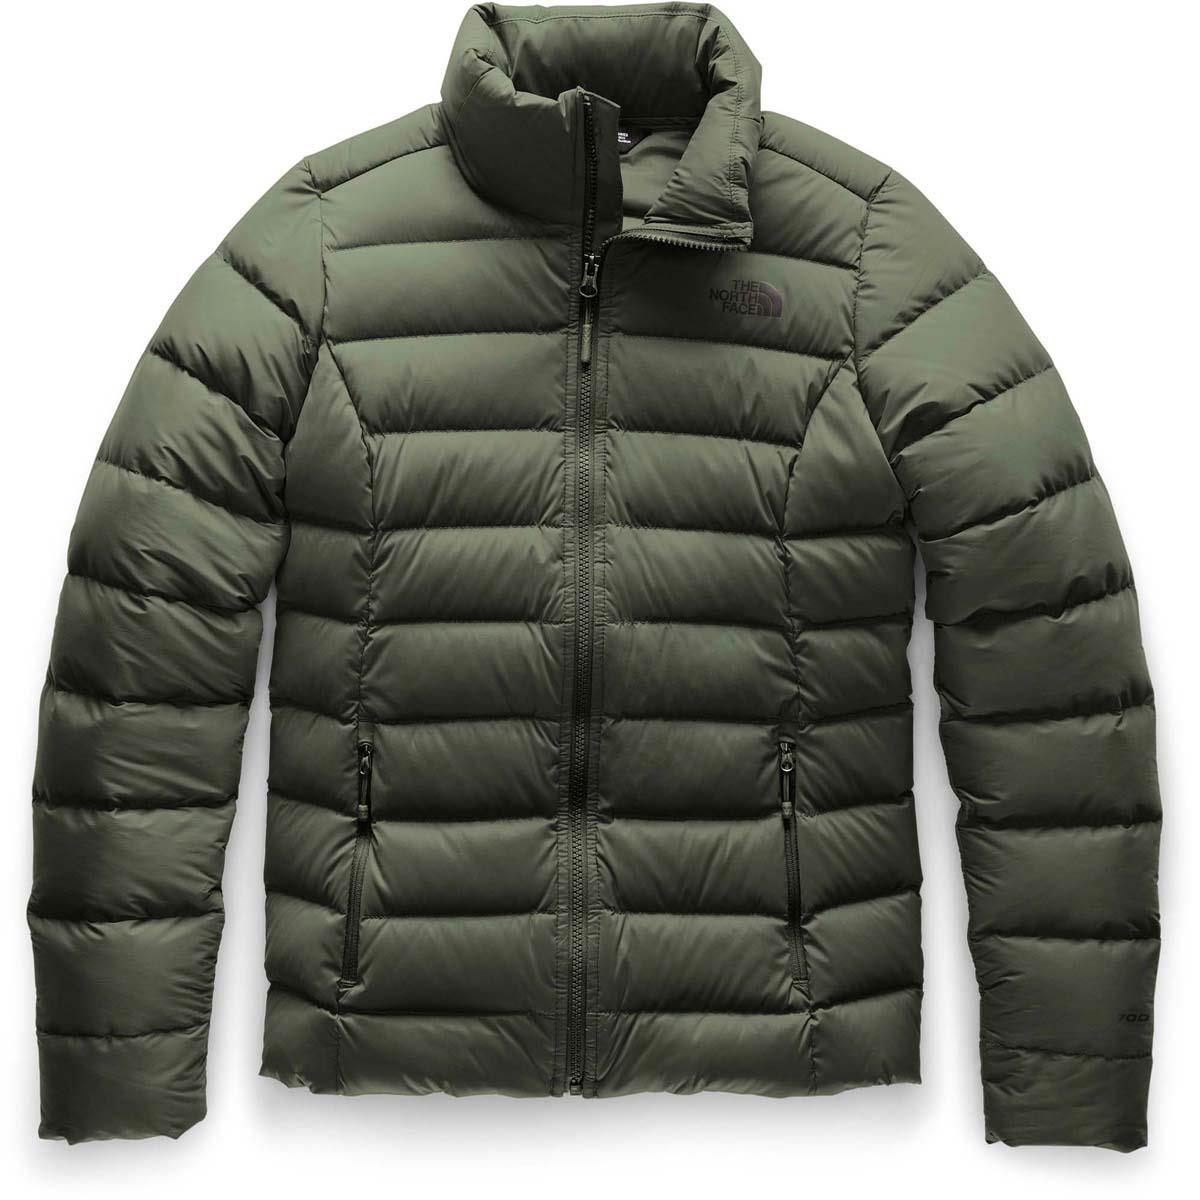 All North Face Jackets Online Sales, UP TO 70% OFF | www 